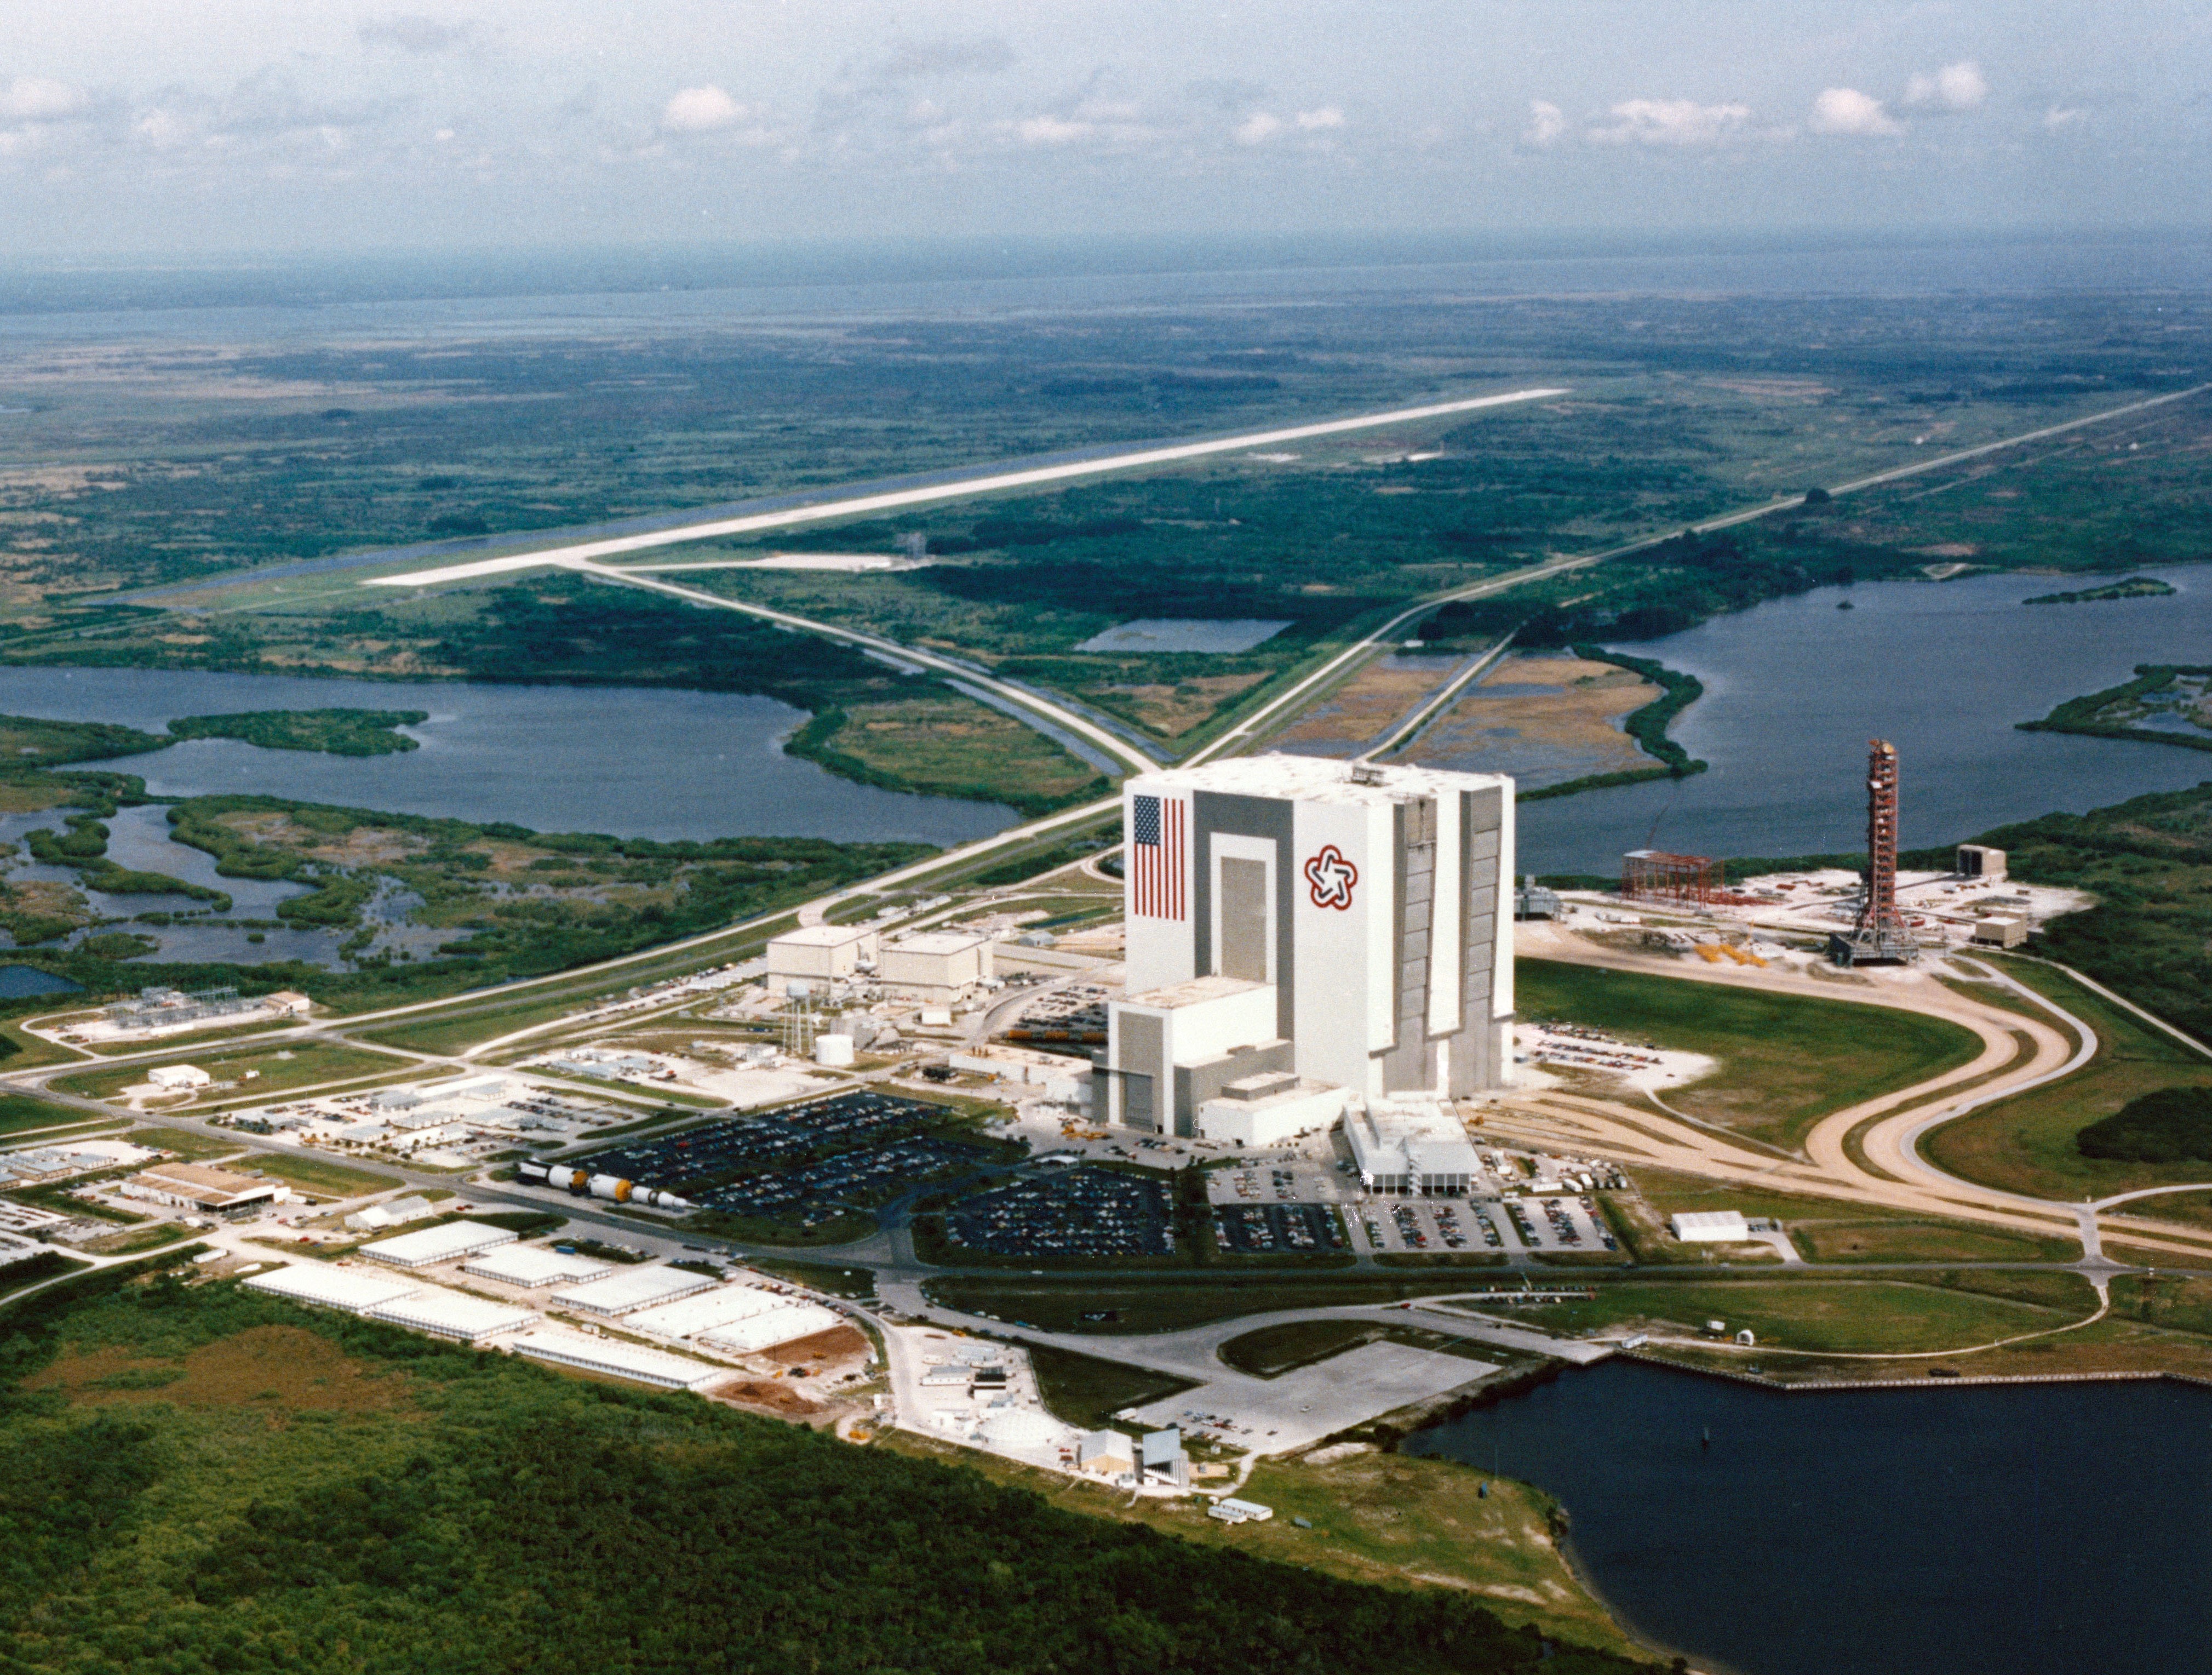 Aerial view at NASA’s Kennedy Space Center (KSC) in Florida of the Vehicle Assembly Building (VAB) and the Shuttle Landing Facility, where STS-41B made the first landing of the program